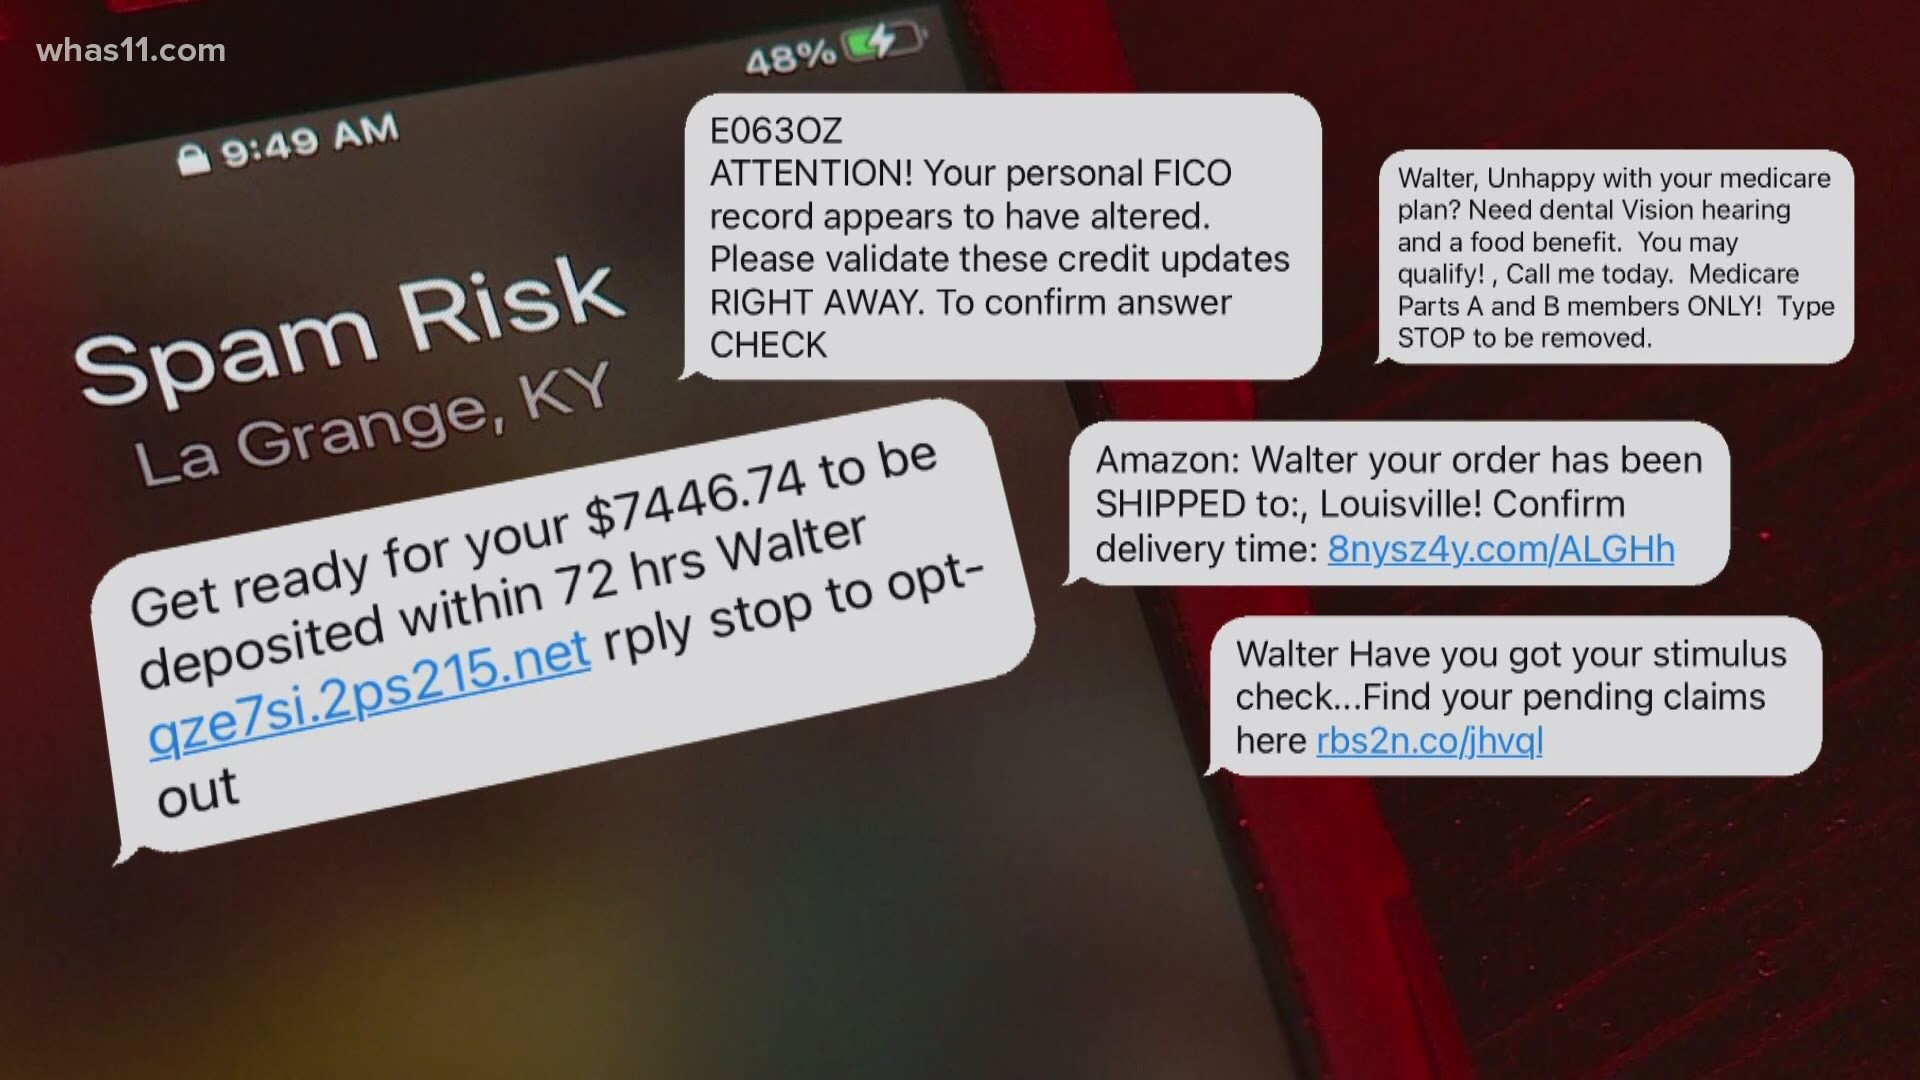 They're an annoyance but could they be attempting to steal from you? FOCUS investigators uncover the origins of robocalls in Kentucky and how they find your number.